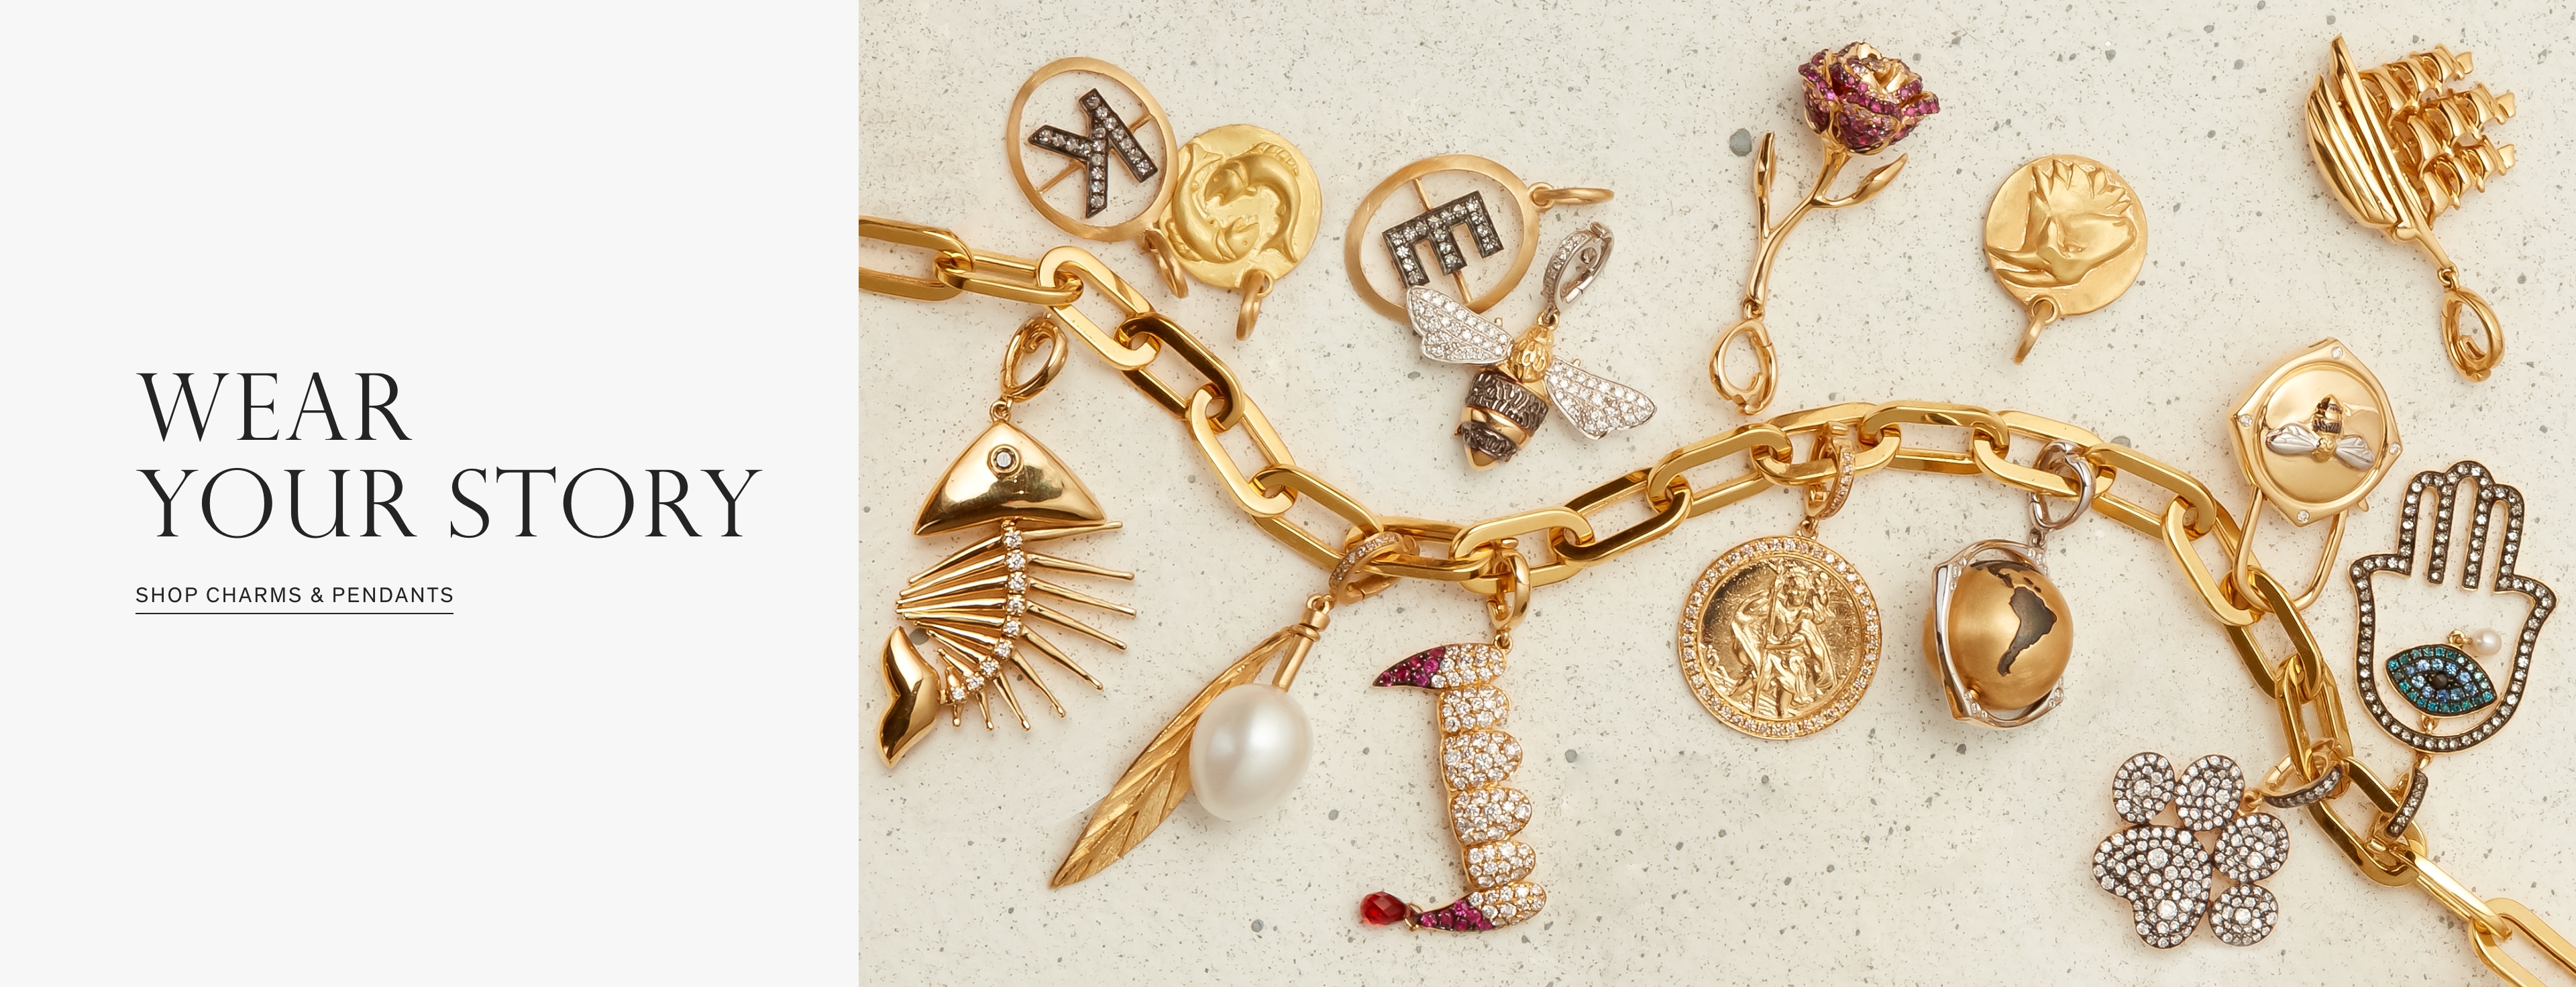 Summer Holiday Charms.Take your summer holiday style to new height with collectable 18ct gold and diamond charms